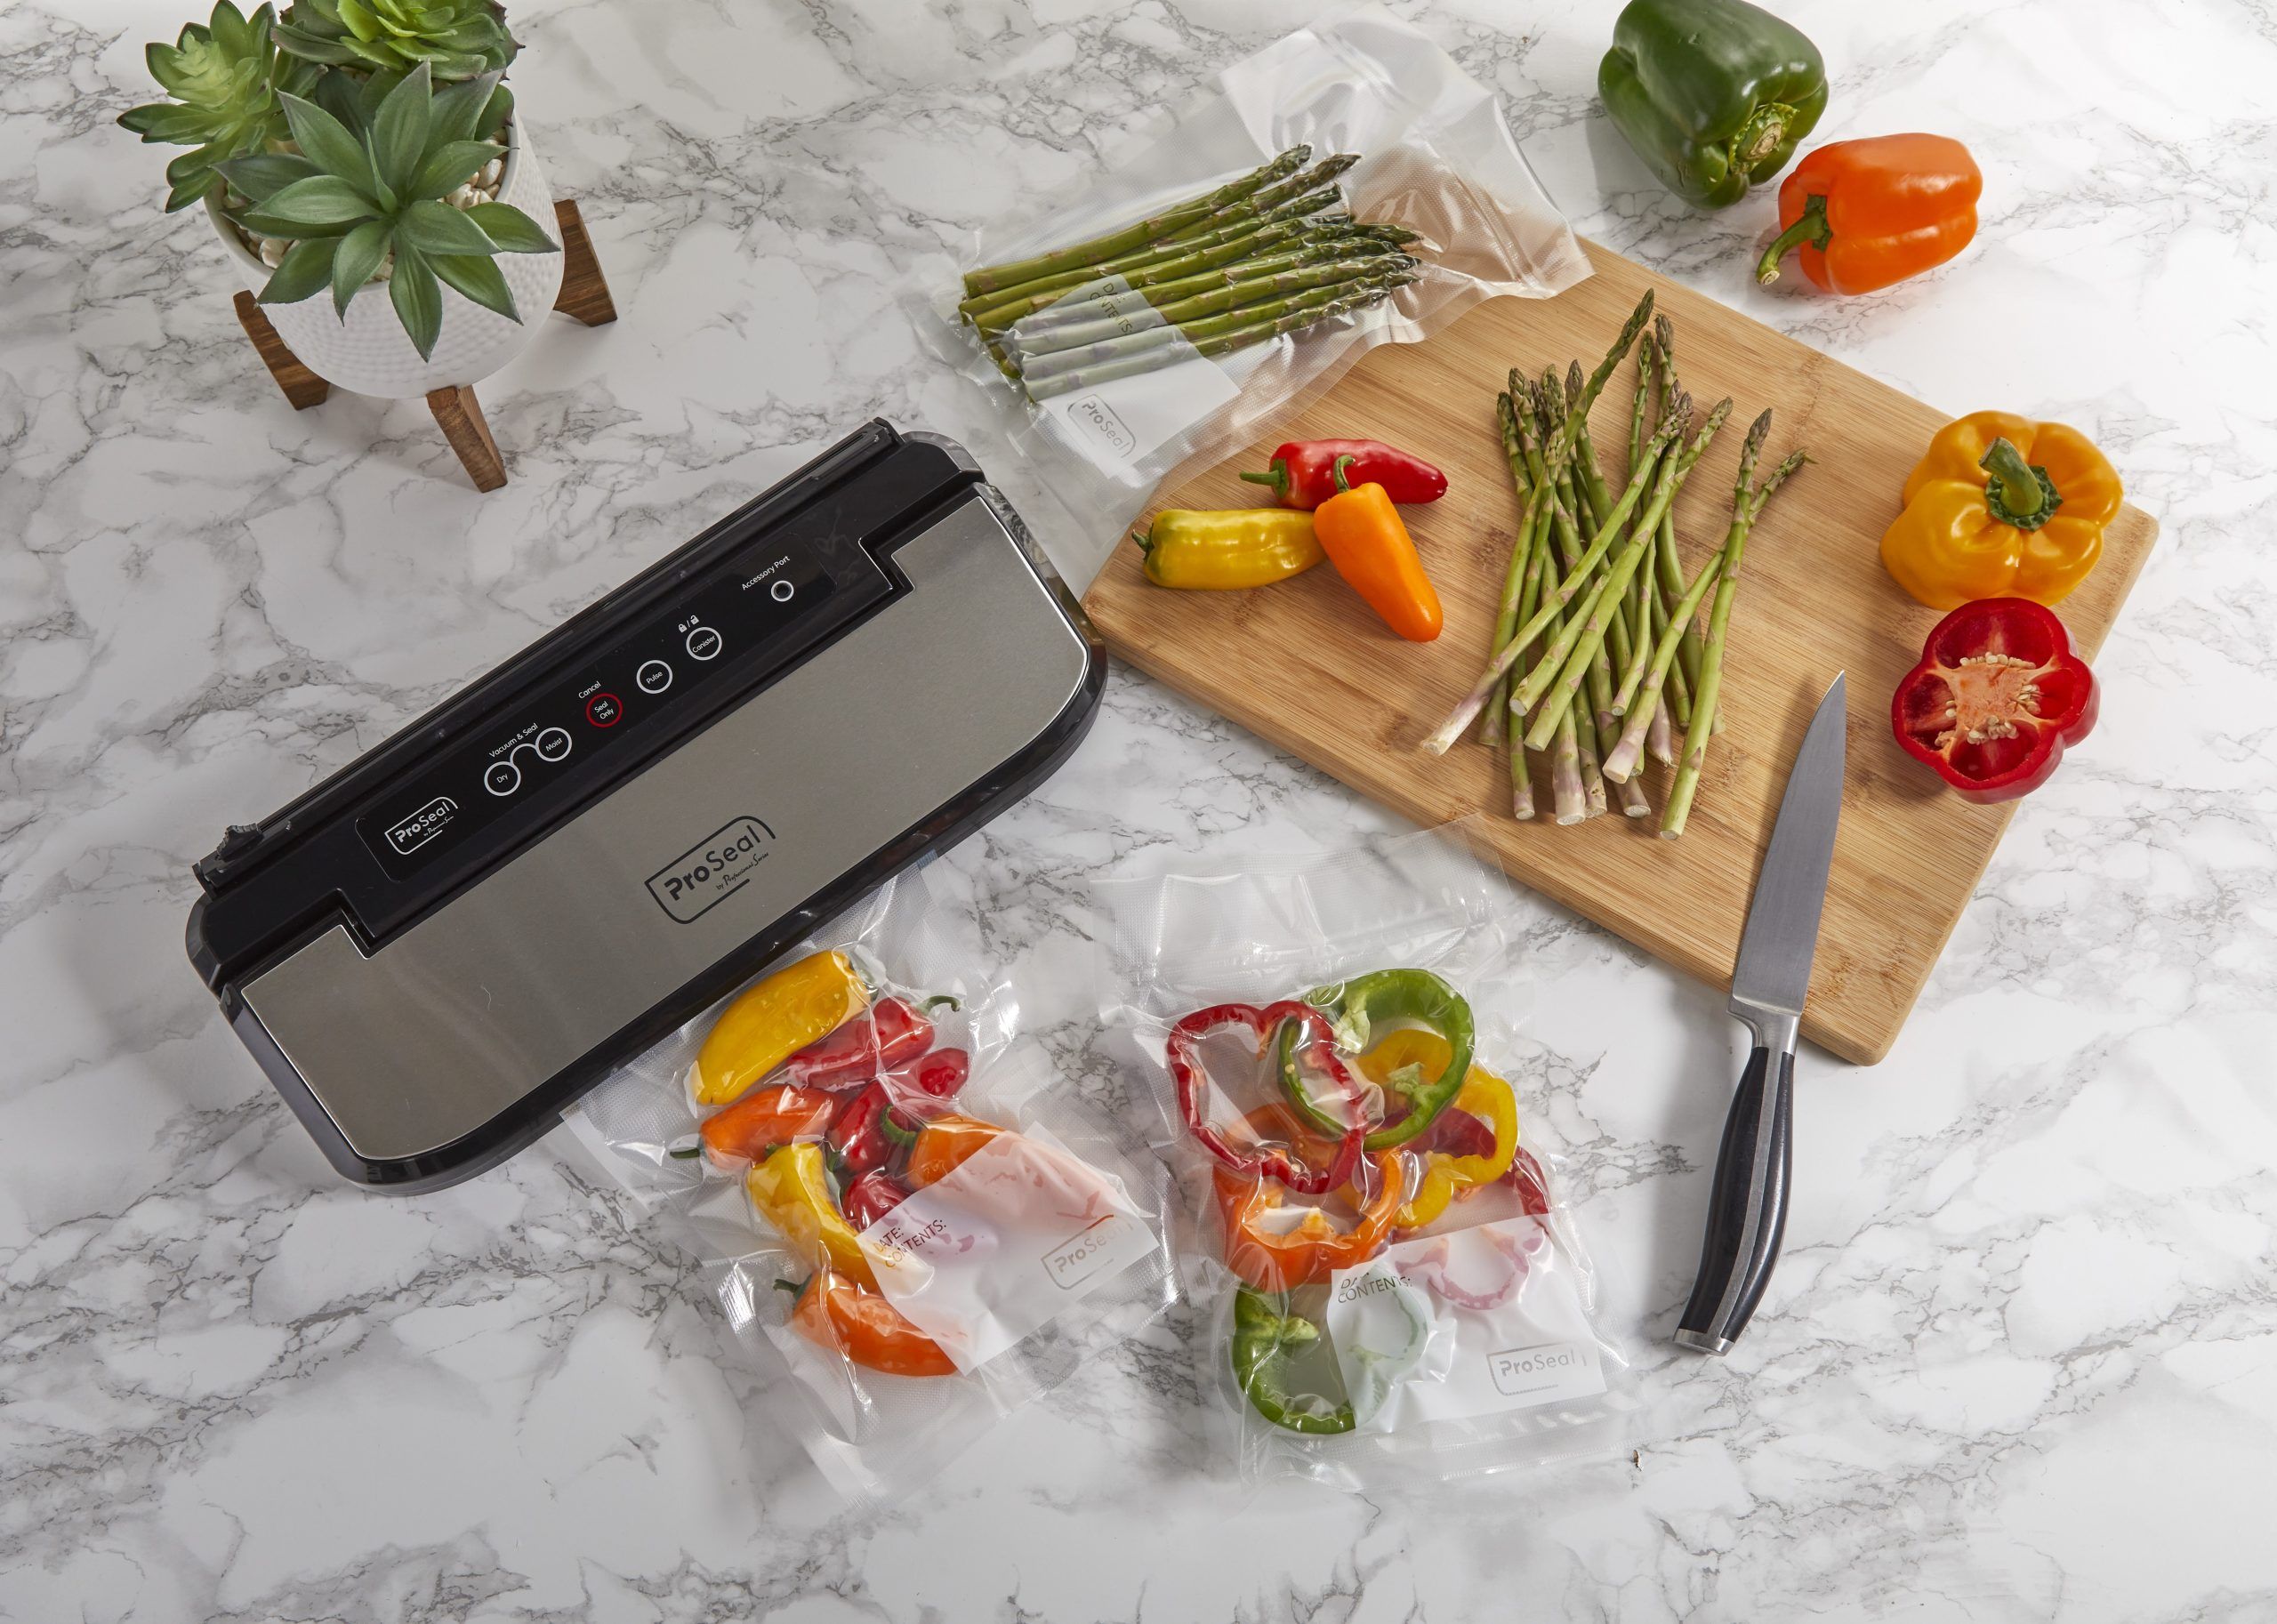 ADVENOR Vacuum Sealer Pro Food Sealer with Built-in Cutter and Bag